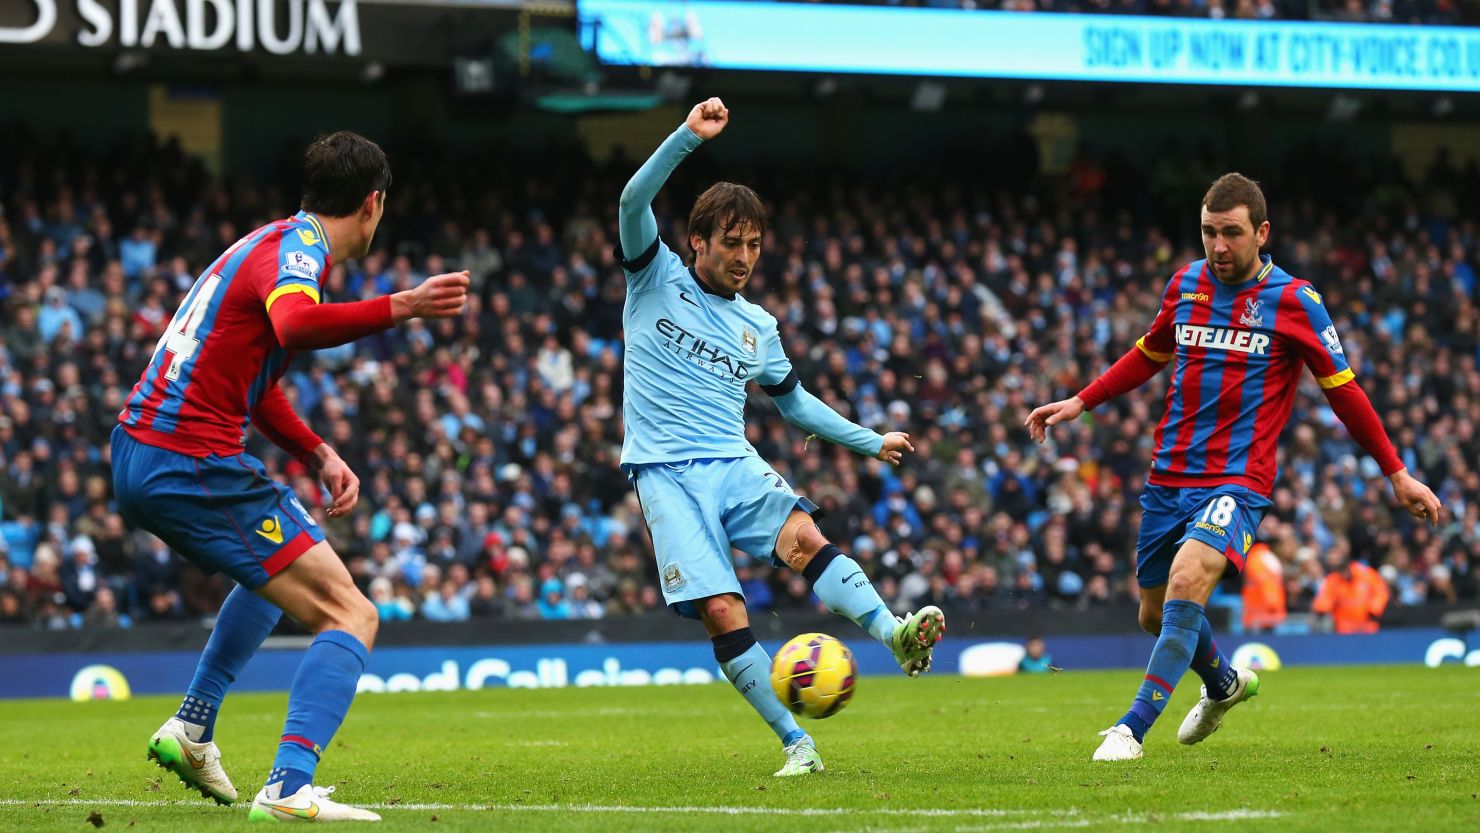 David Silva scored twice for Manchester City to take the defending champions level on points with leaders Chelsea